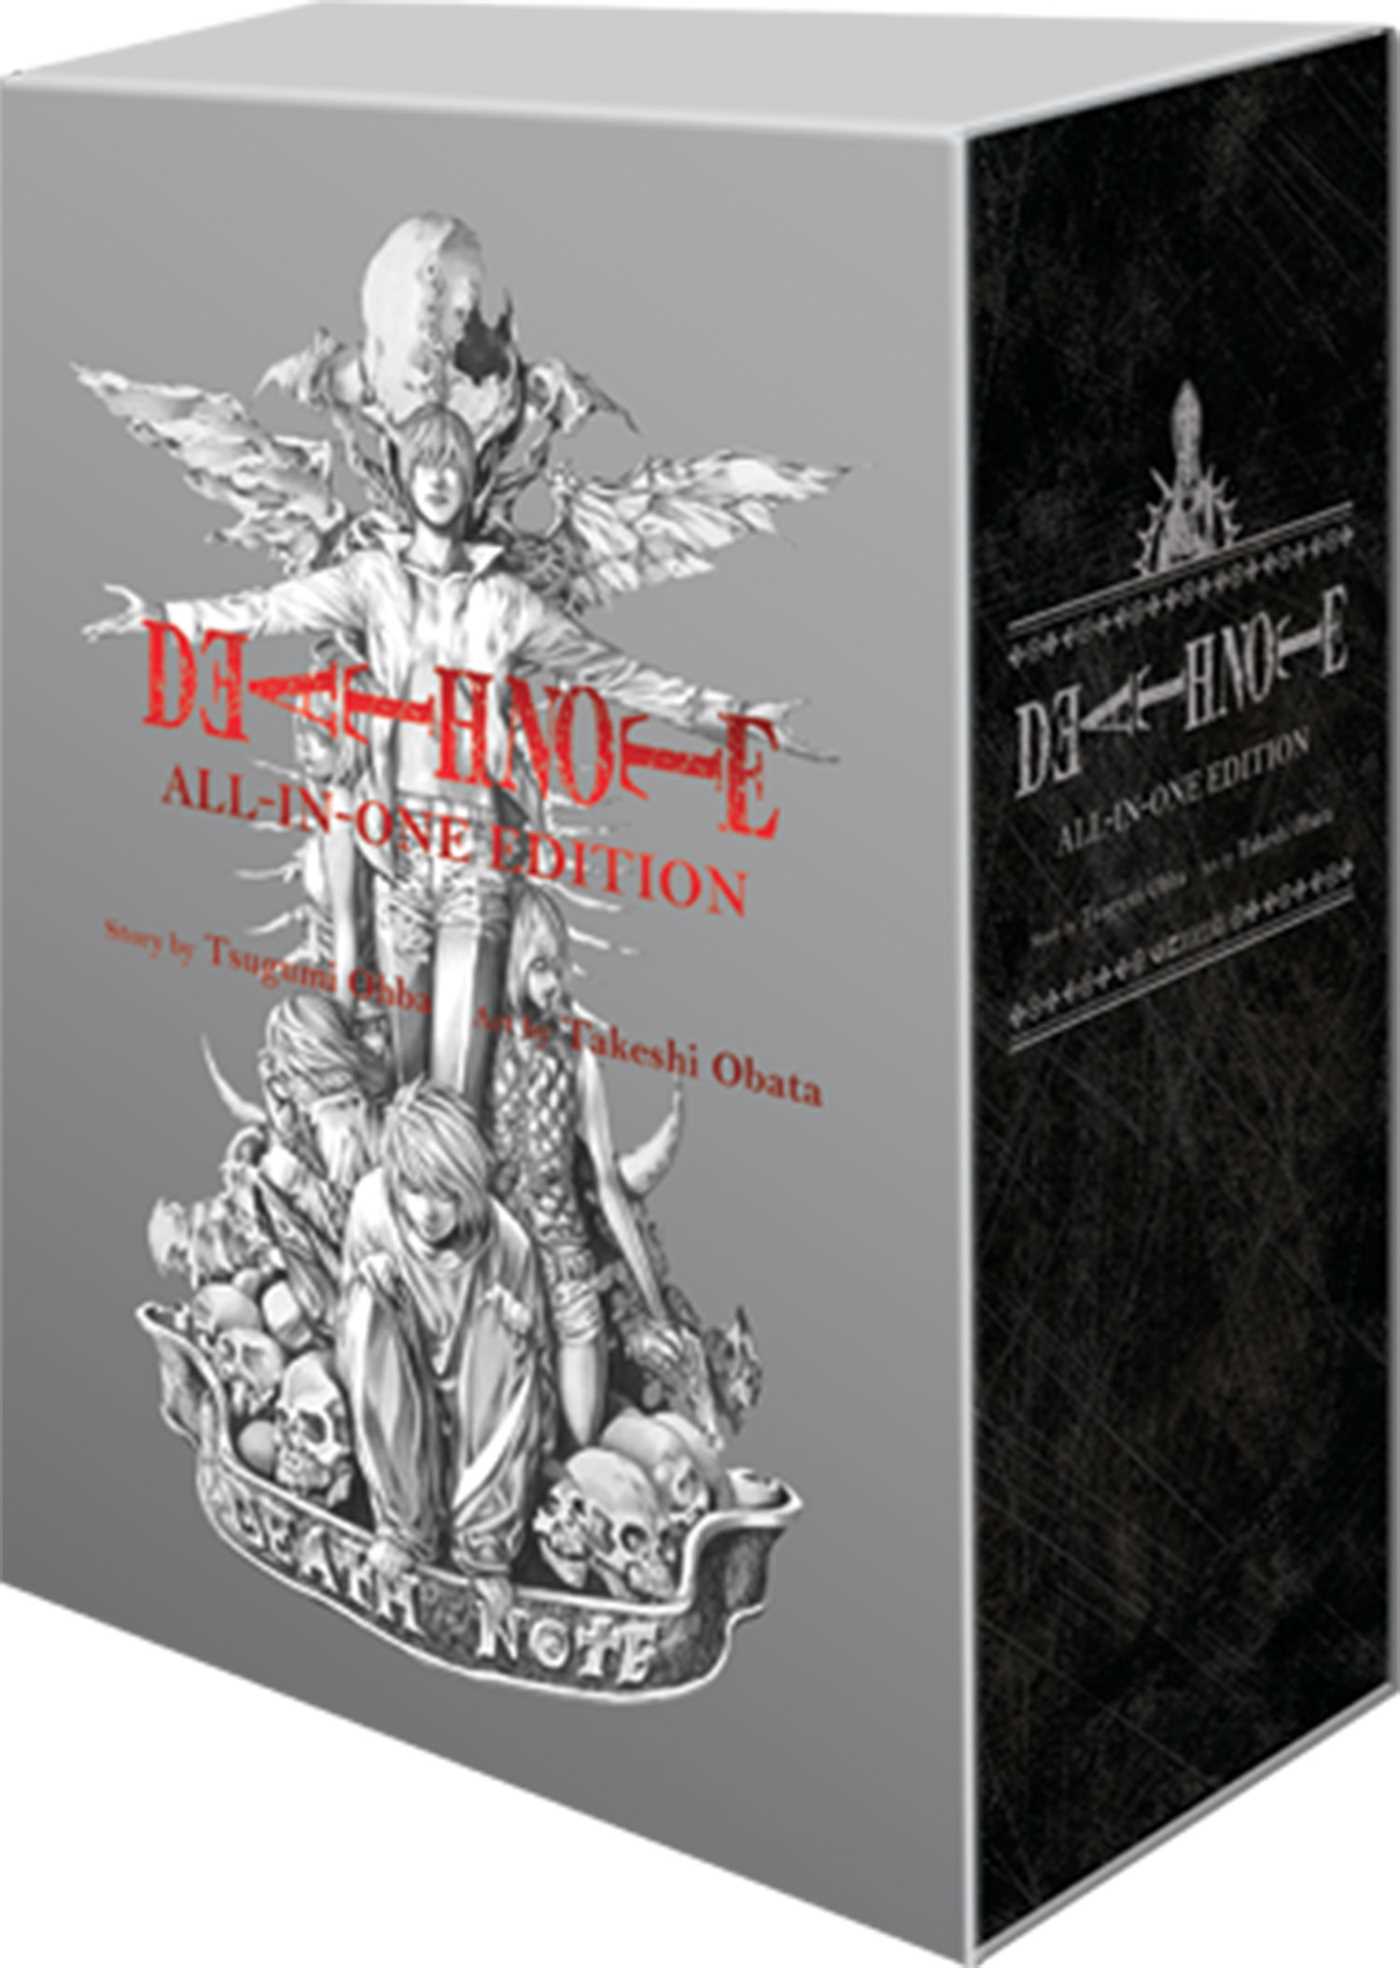 DEATH NOTE (ALL-IN-ONE ED)